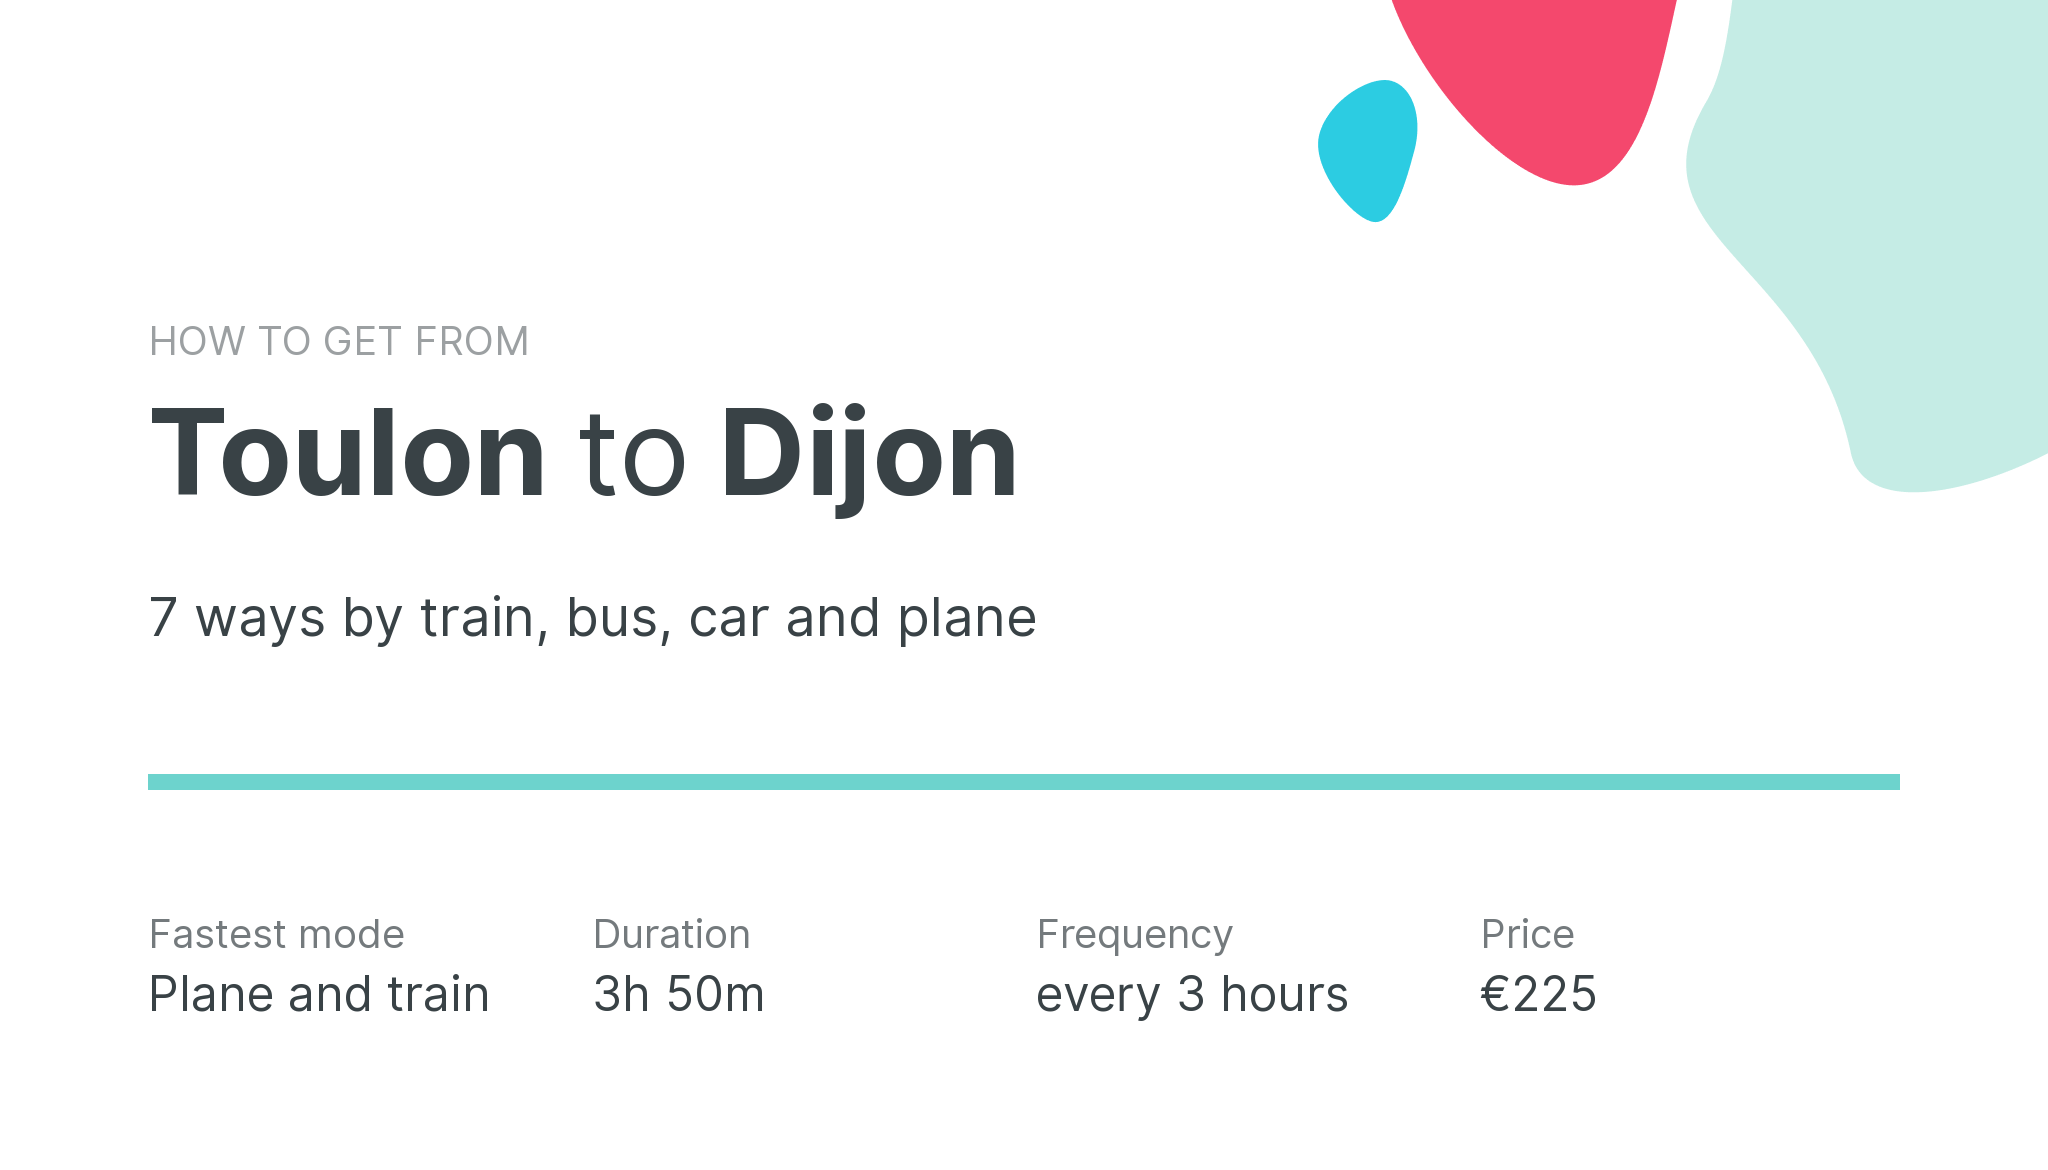 How do I get from Toulon to Dijon